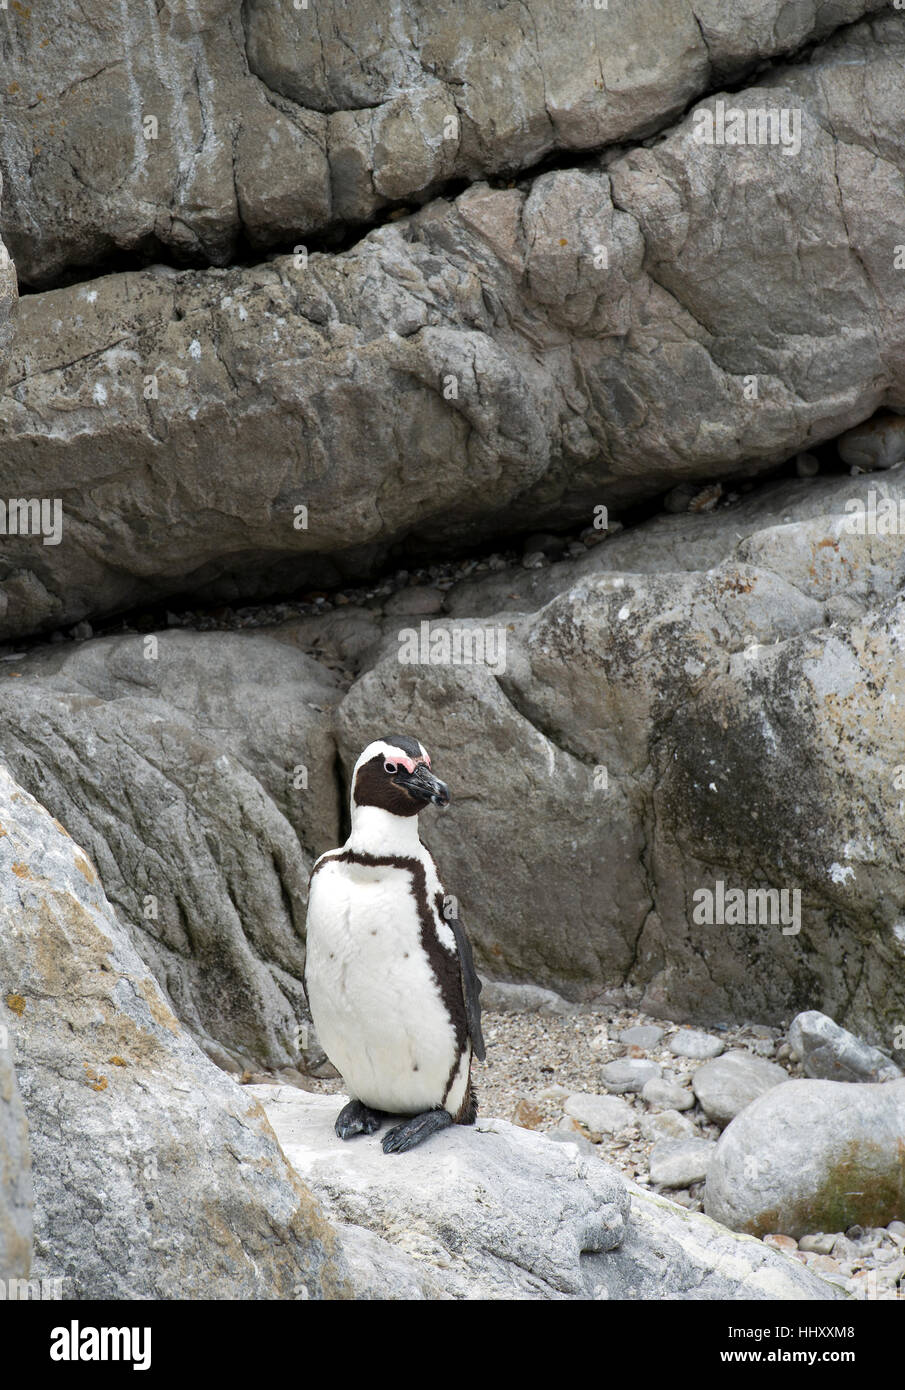 South African penguins (Spheniscus demersus) near Cape Town in South Africa Stock Photo